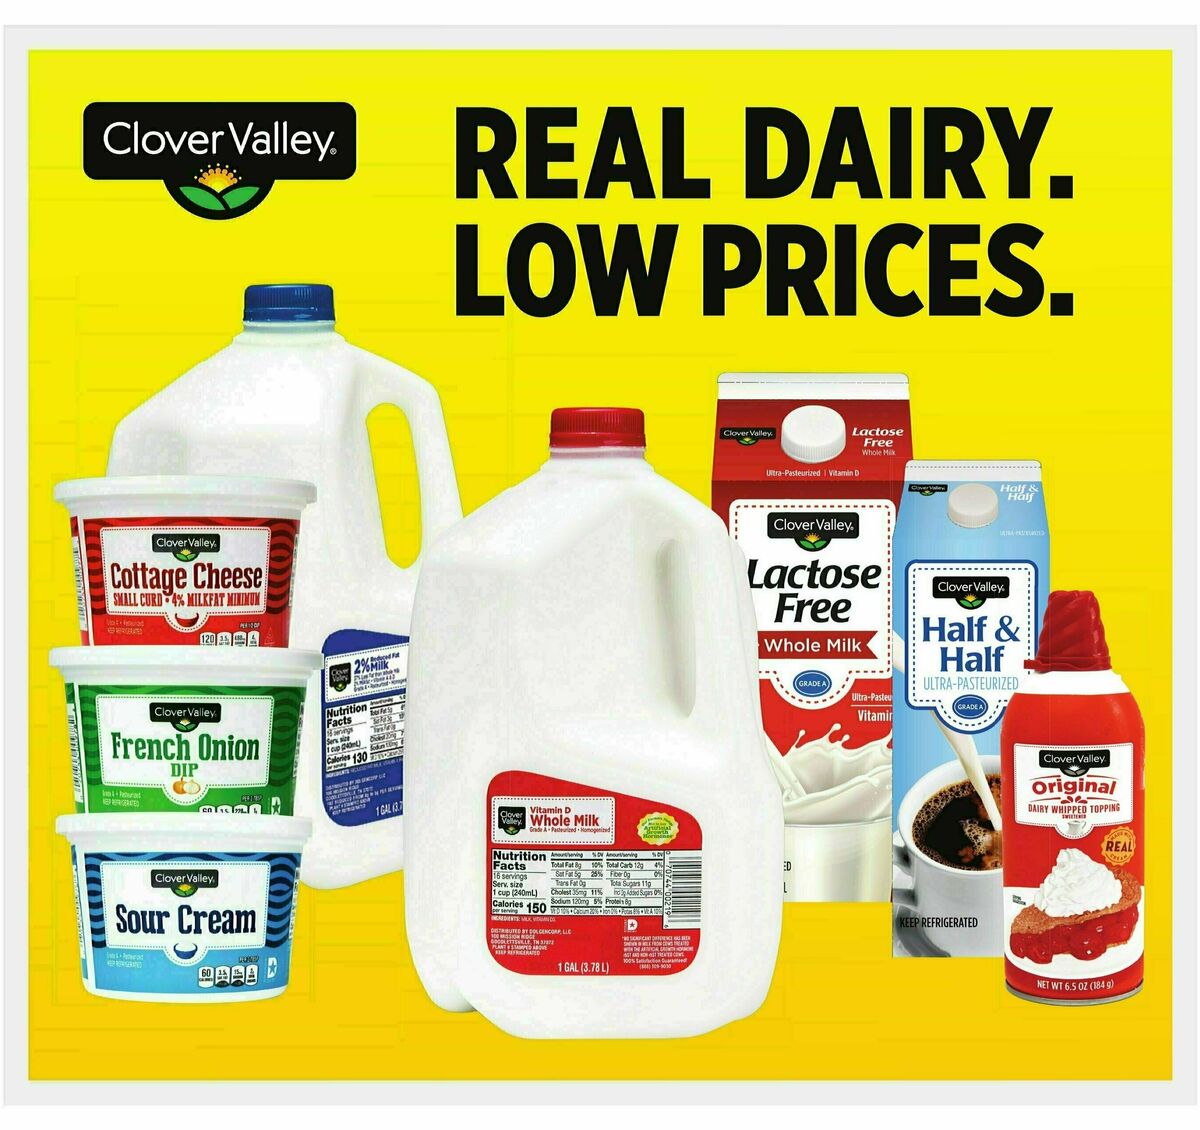 Dollar General Weekly Ad from August 13